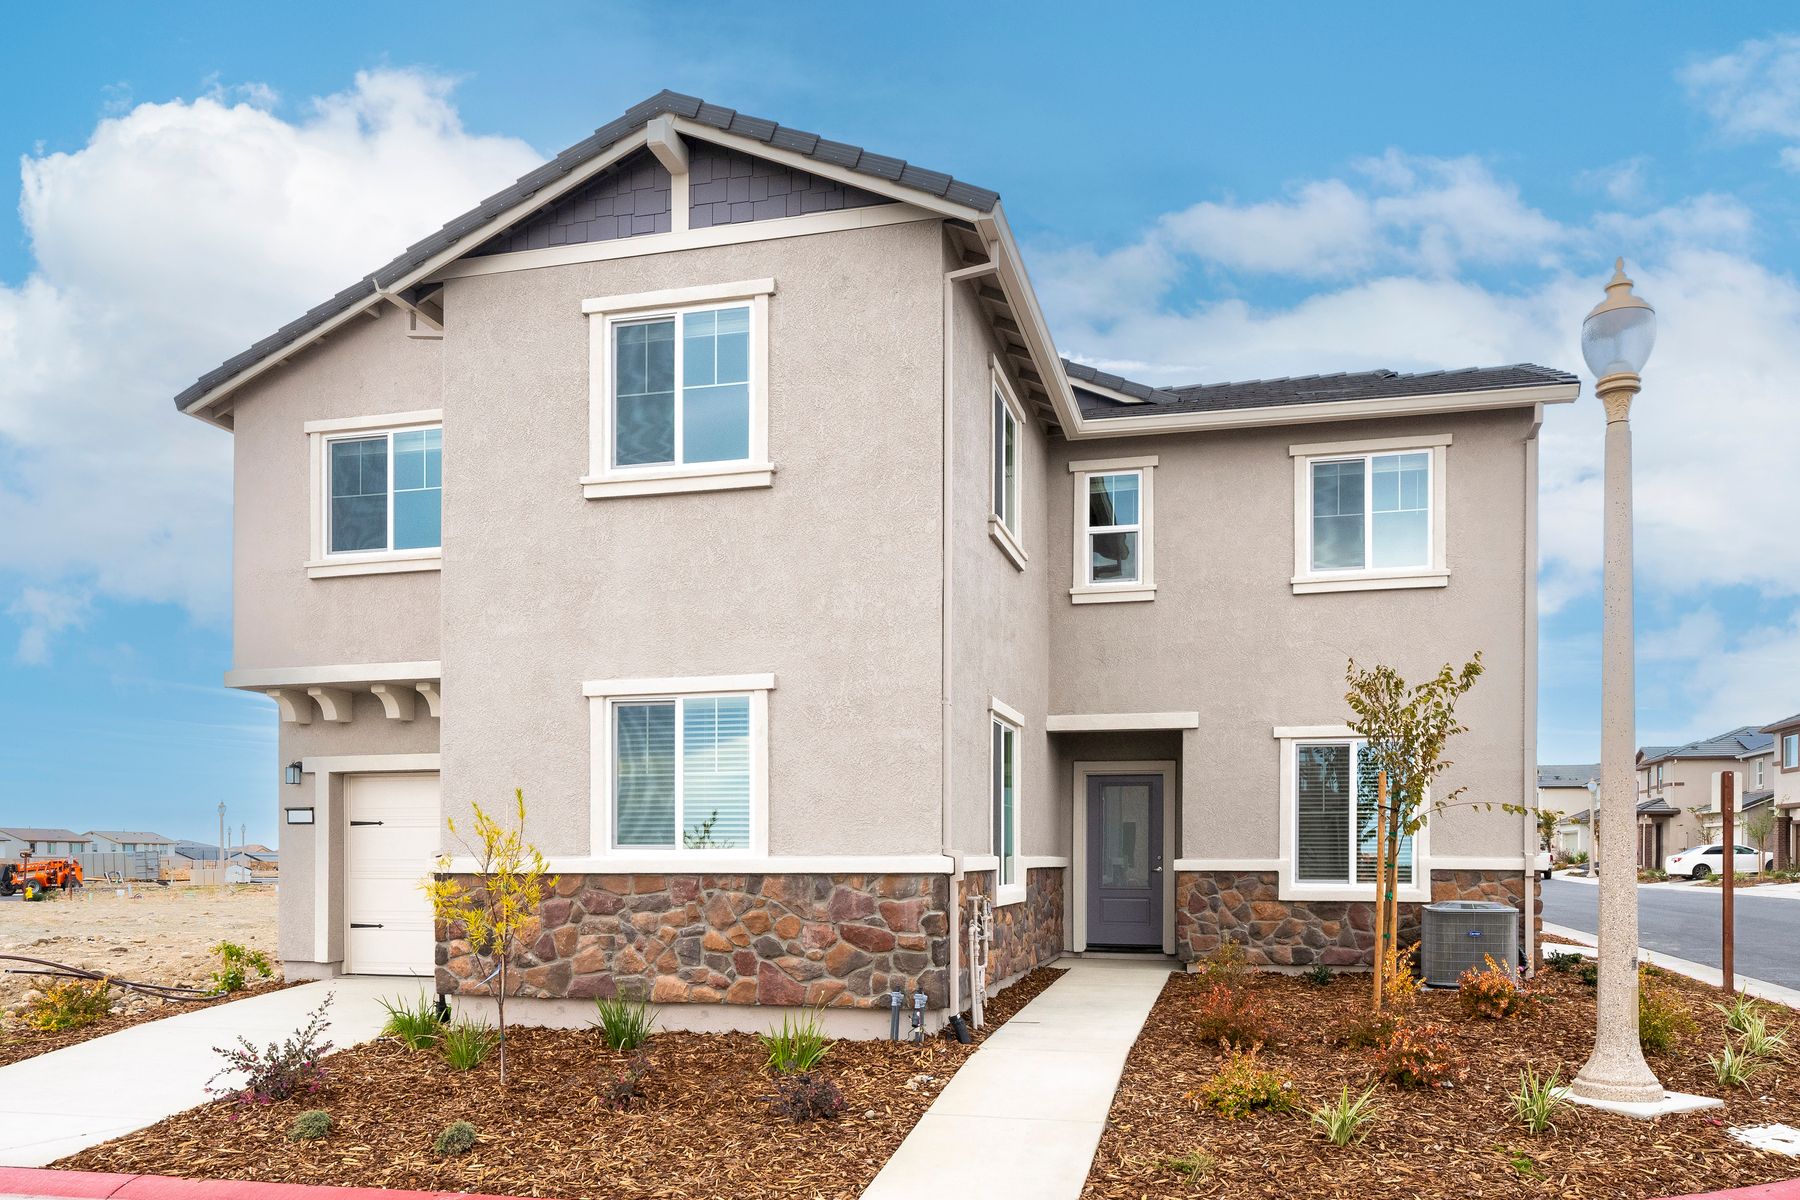 The Cameron by LGI Homes:The Cameron is a beautiful 3 bedroom home.